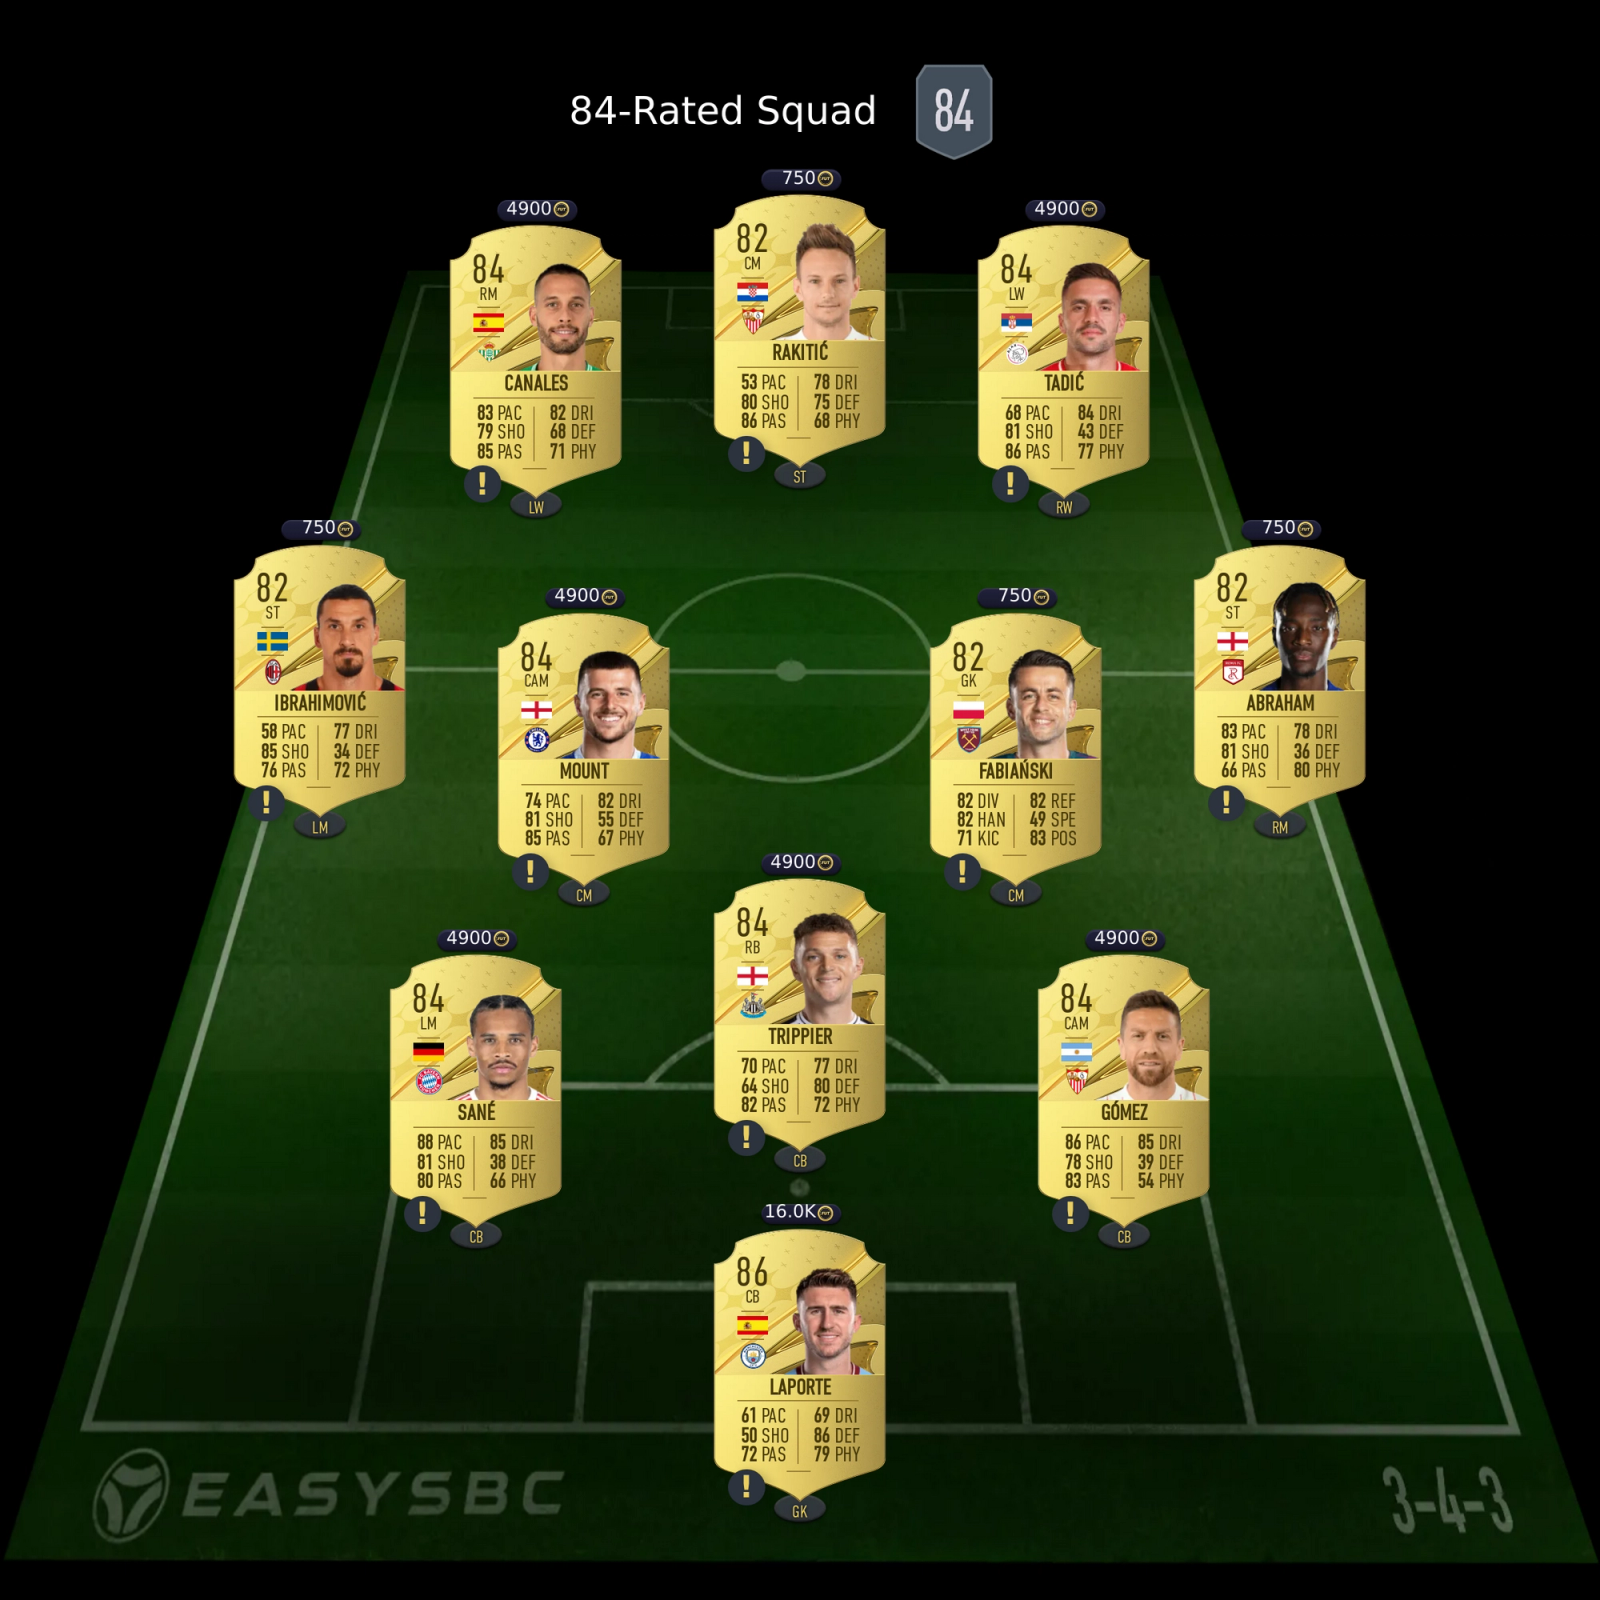 83+ x10 upgrade sbc solution 84-rated squad